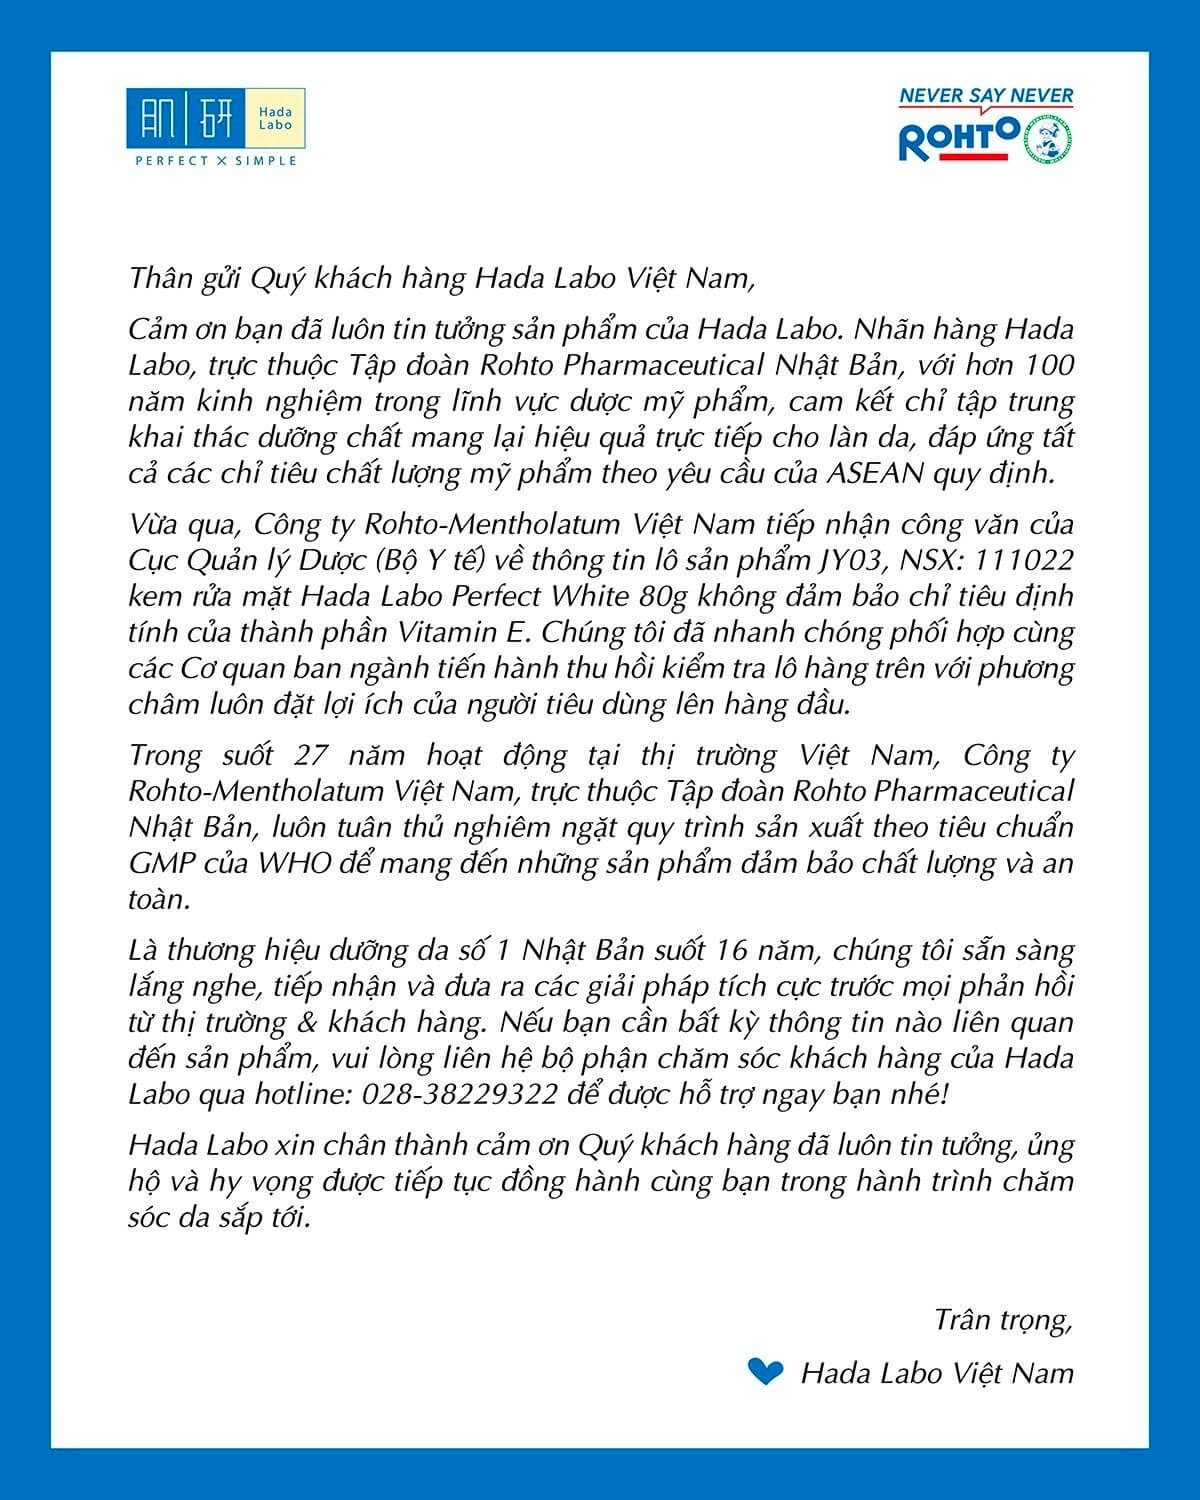 Notice from Hada Labo brand about facial cleanser products in Vietnam